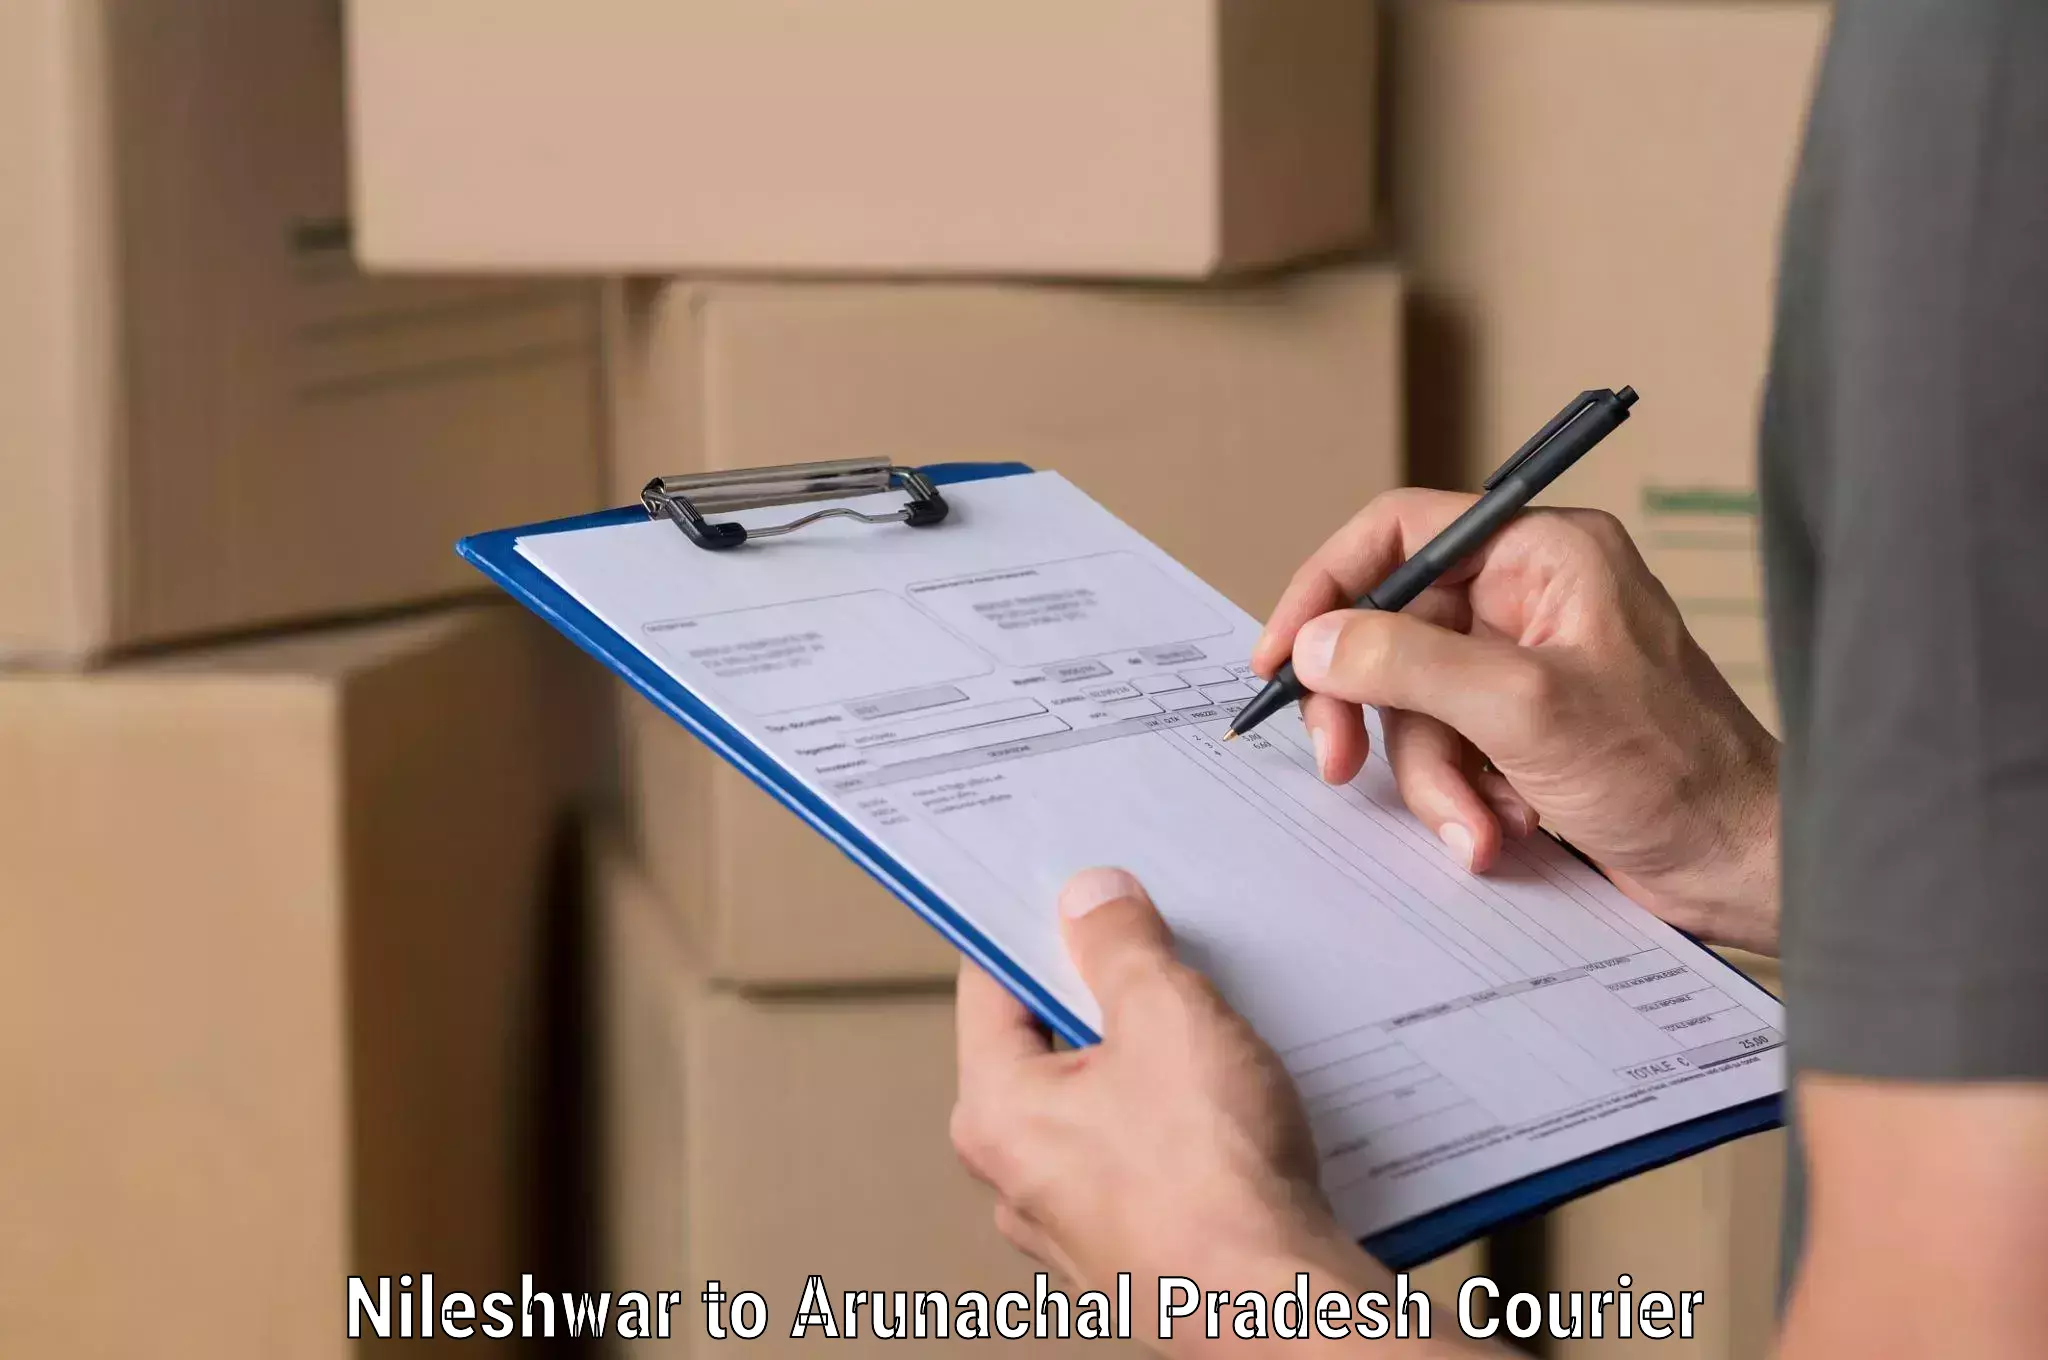 State-of-the-art courier technology Nileshwar to Likabali